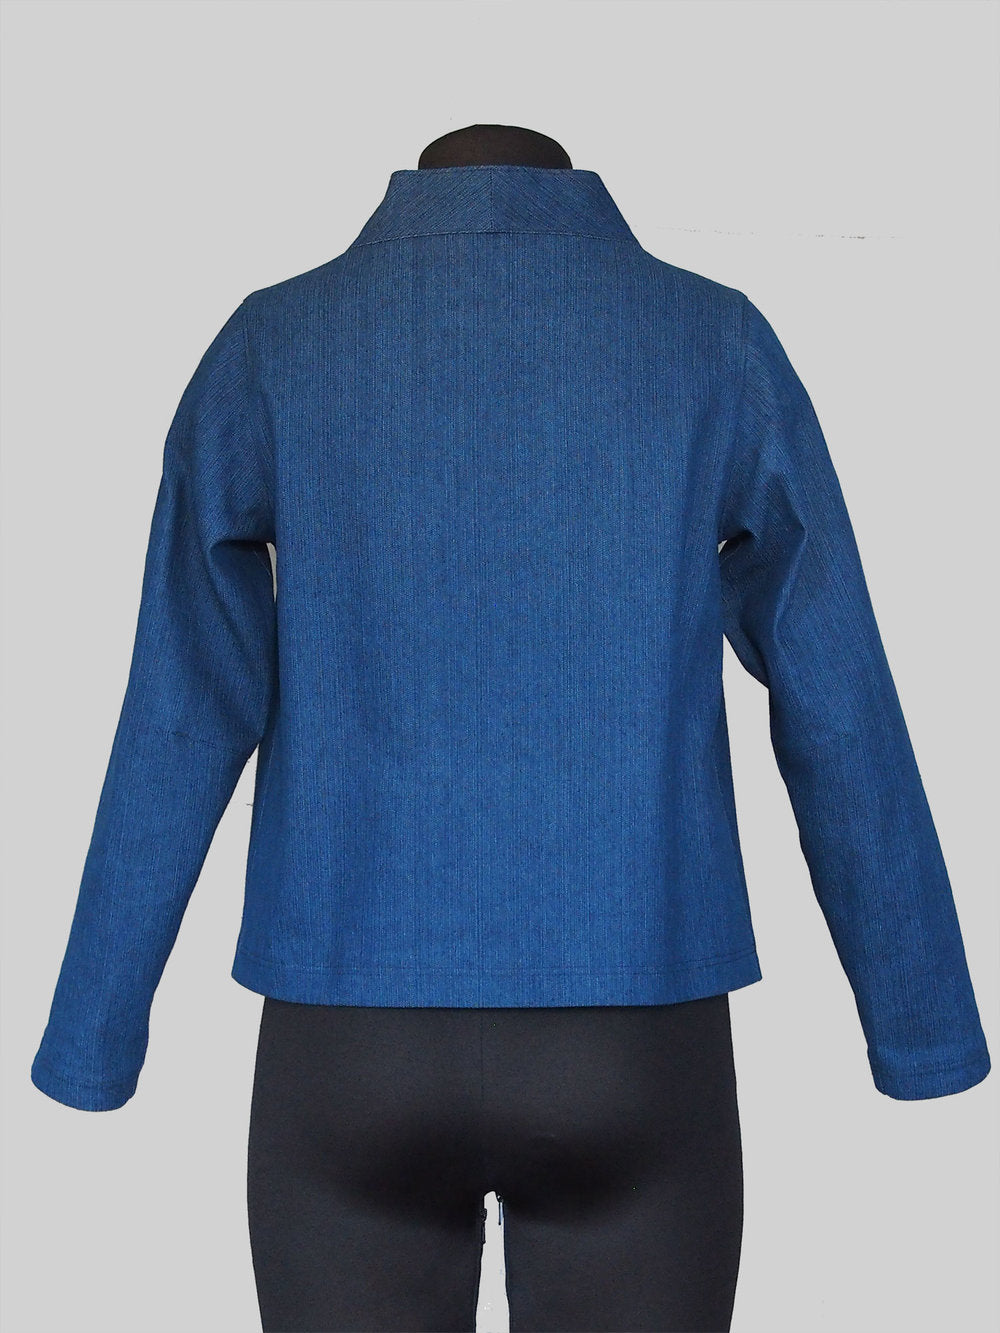 The Assembly Line Elastic Tie Sweater